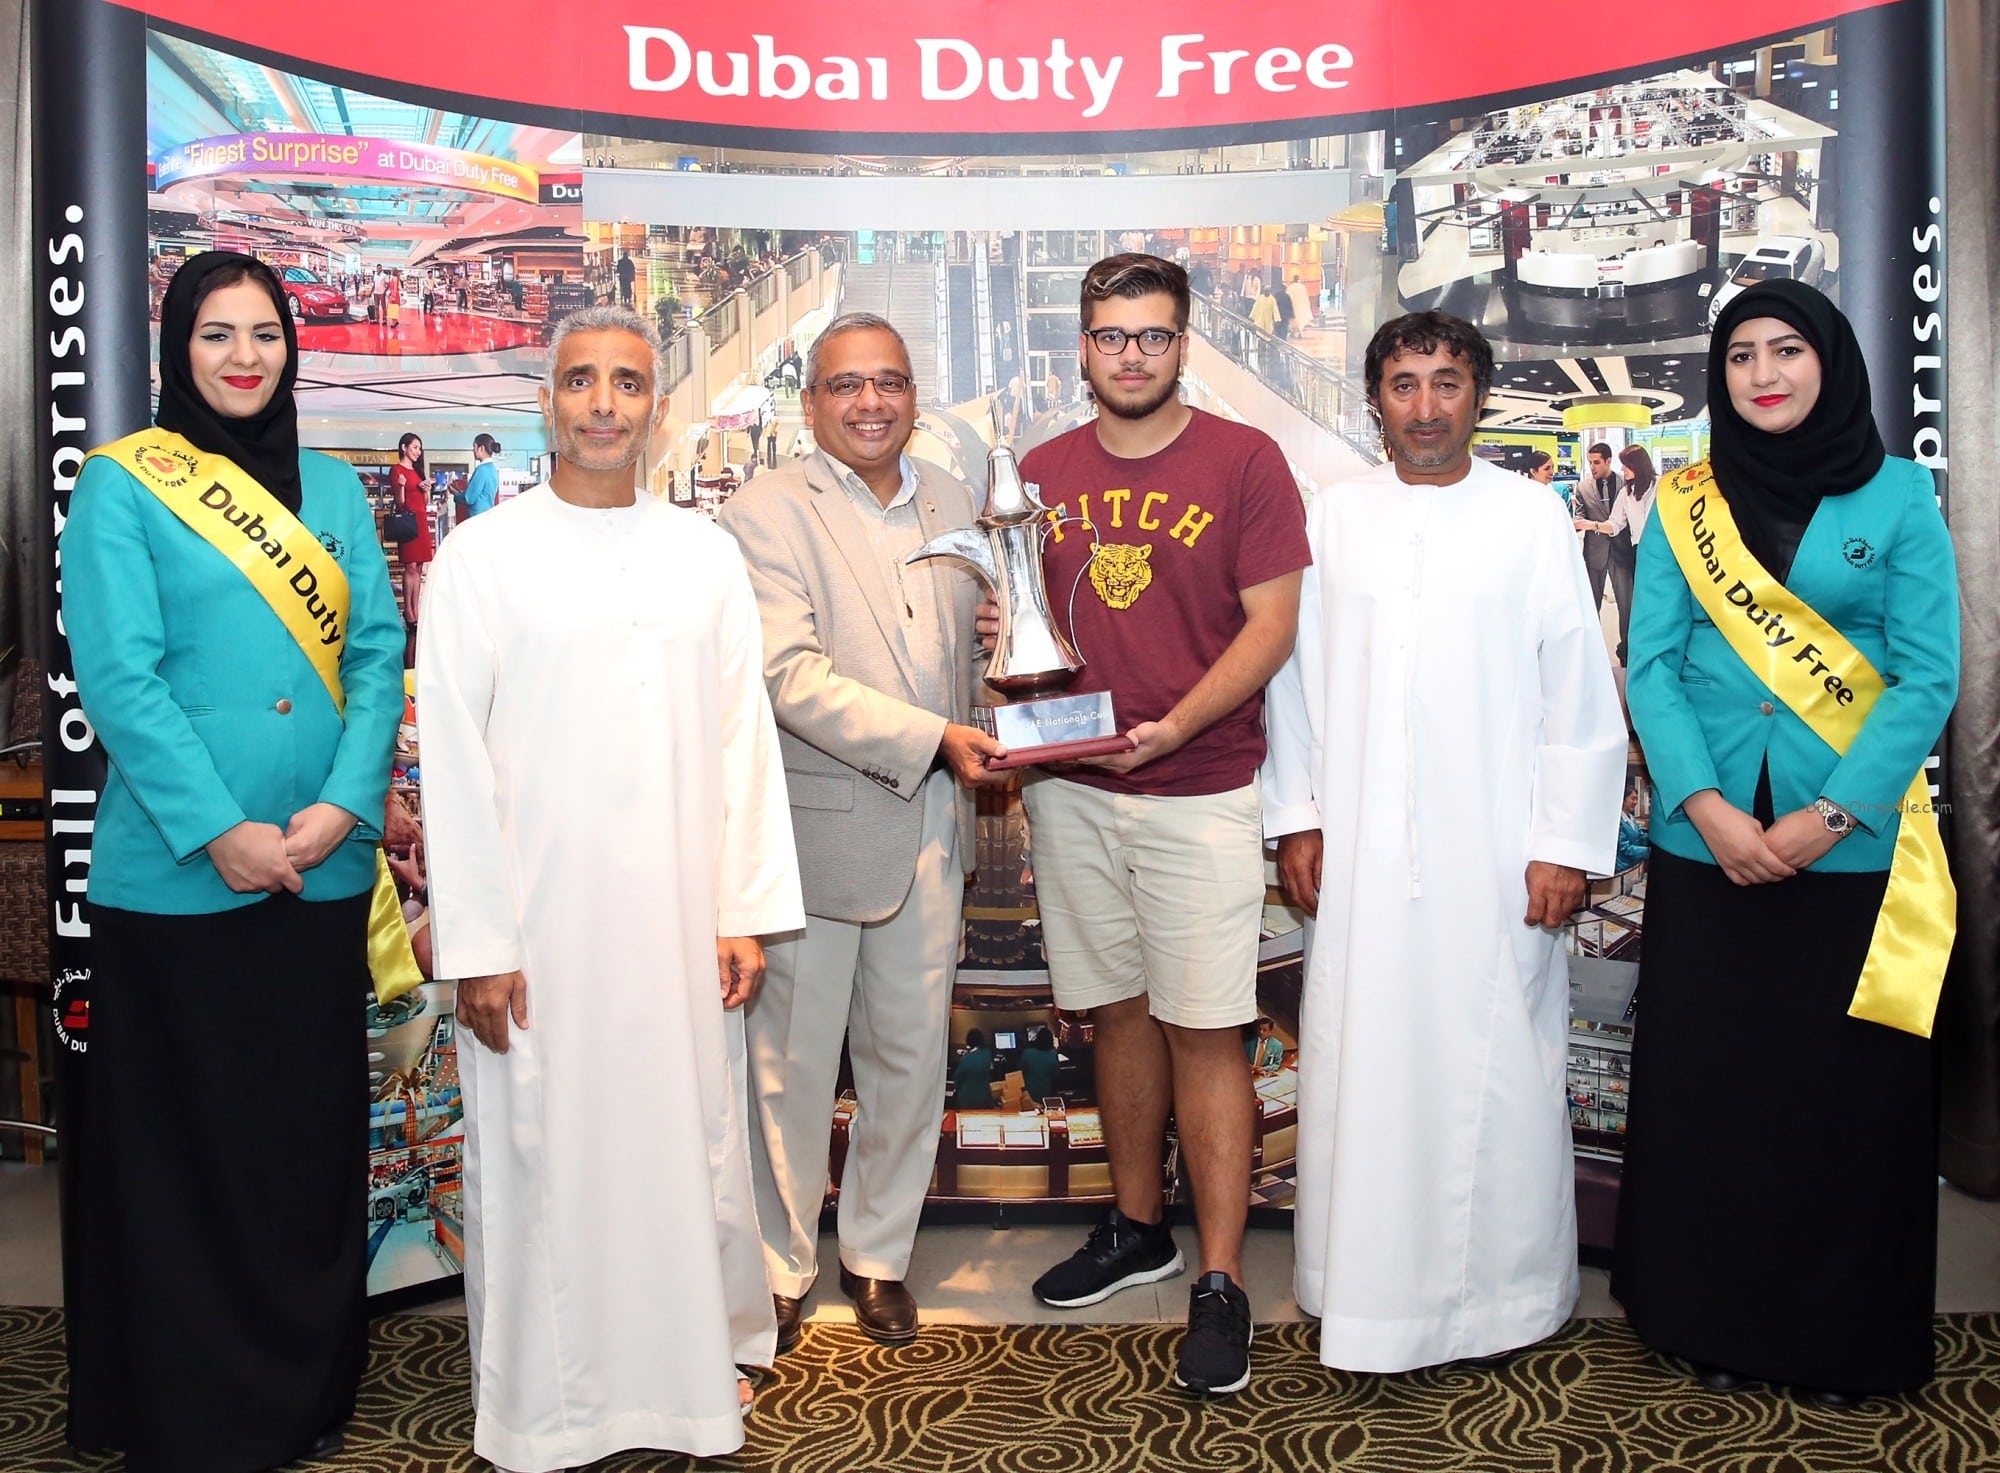 Saeed Al Balooshi overall winner of the DDF UAE Nationals Cup